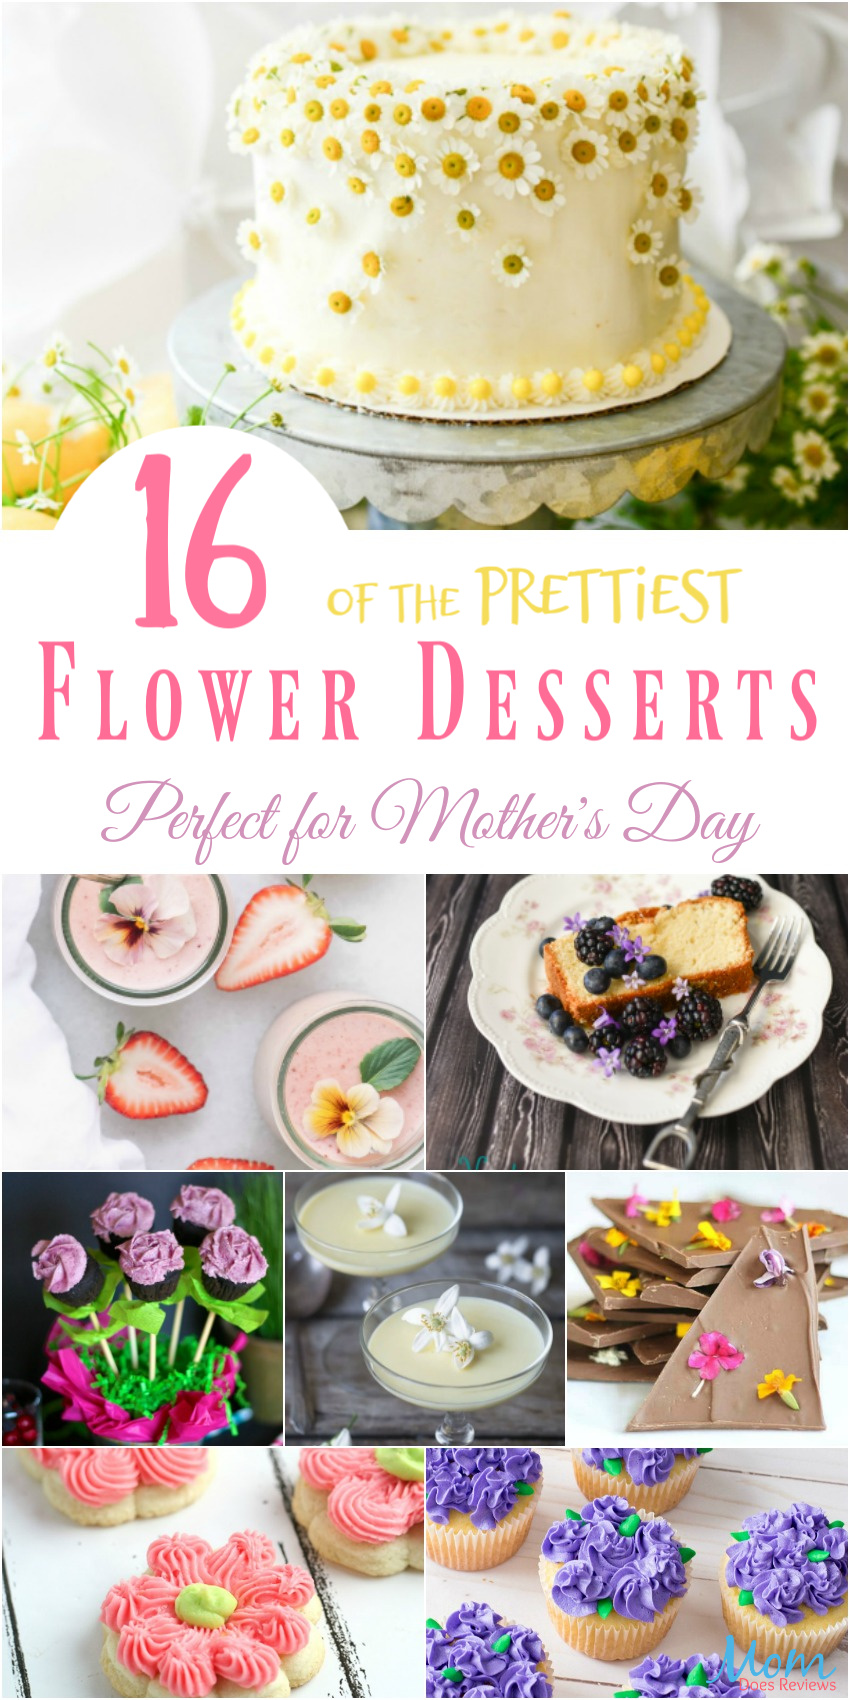 16 of the Prettiest Flower Desserts Perfect for Mother's Day